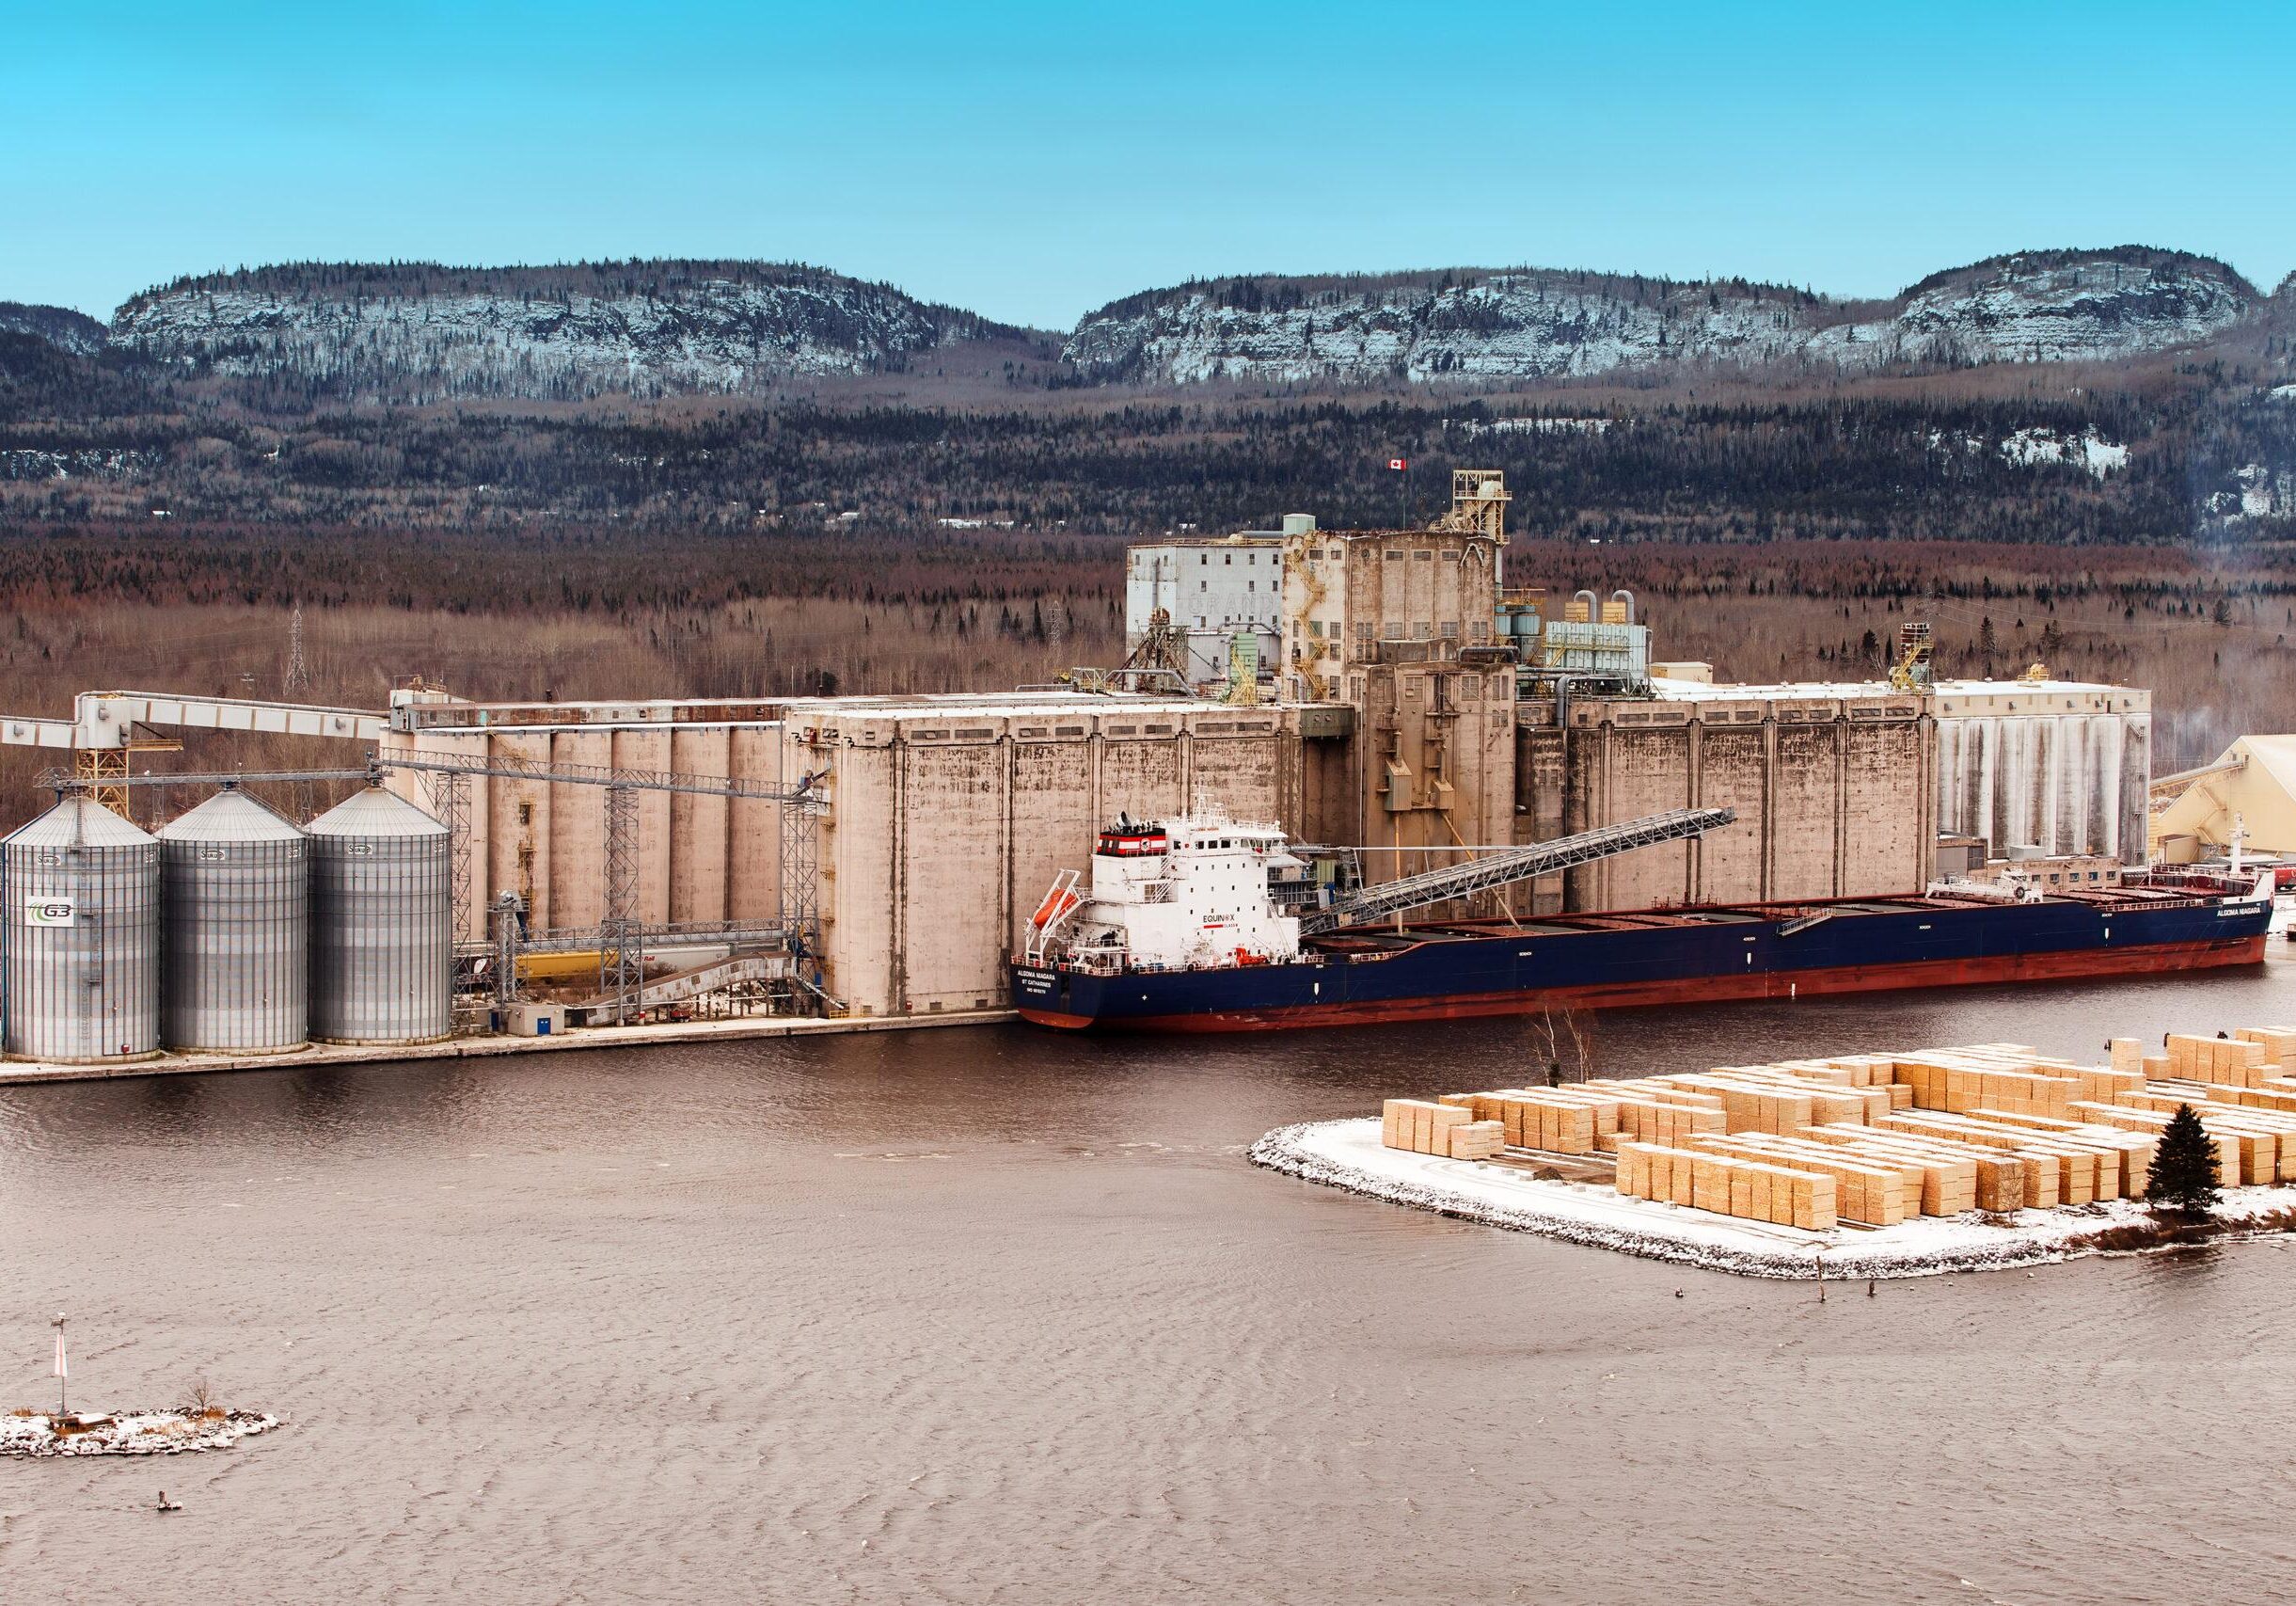 SEARLE ALGOMA NIAGARA 7941 FROM HYDRO STACK NOV 21, 2017 MOUNT McKAY IN BACK GROUND PHOTO BY CARLO LOMBARDO 28 WD 19.png